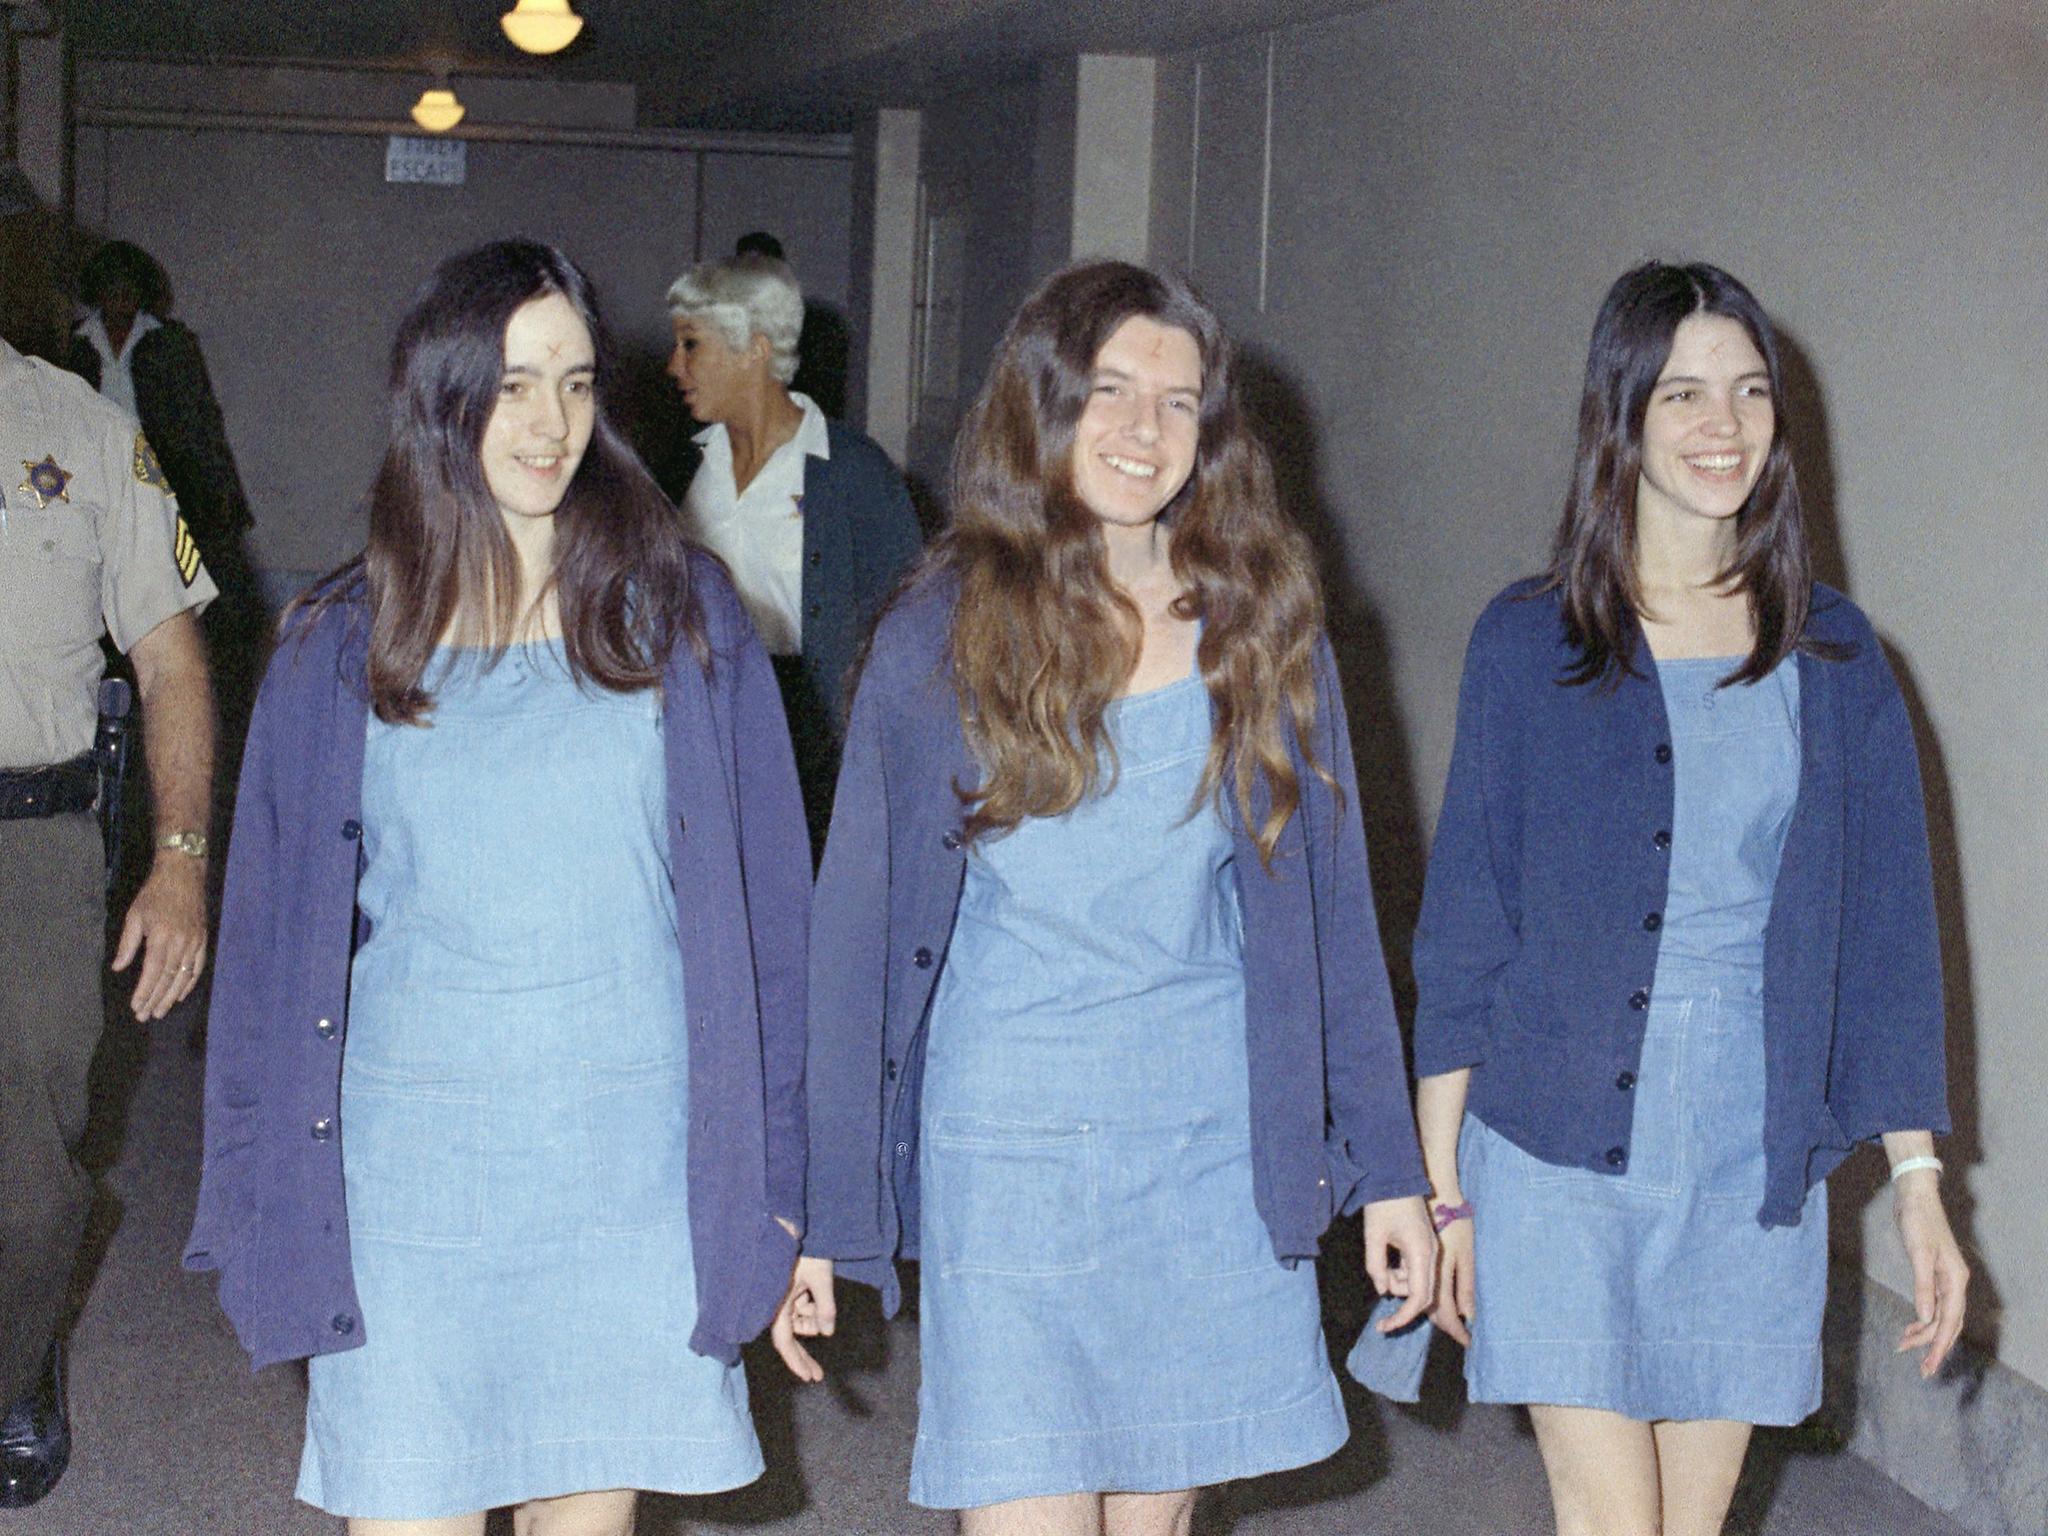 Susan Atkins, Patricia Krenwinkel and Leslie Van Houten walk to court to appear for their roles in the 1969 cult killings of seven people, including pregnant actress Sharon Tate, in Los Angeles